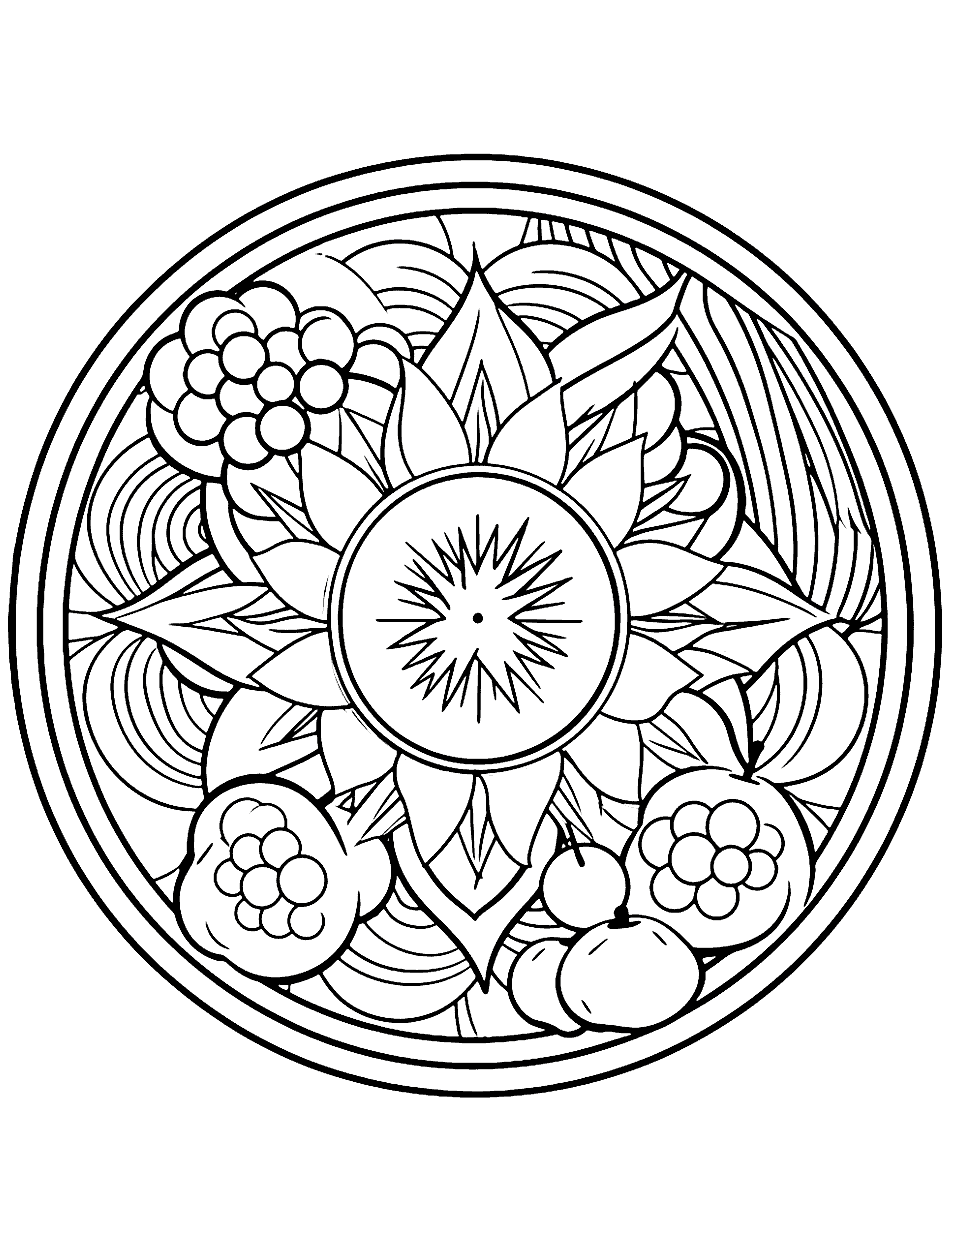 Bountiful Harvest Mandala Coloring Page - A mandala featuring various fruits and vegetables, perfect for teaching children about different types of food and healthy eating.